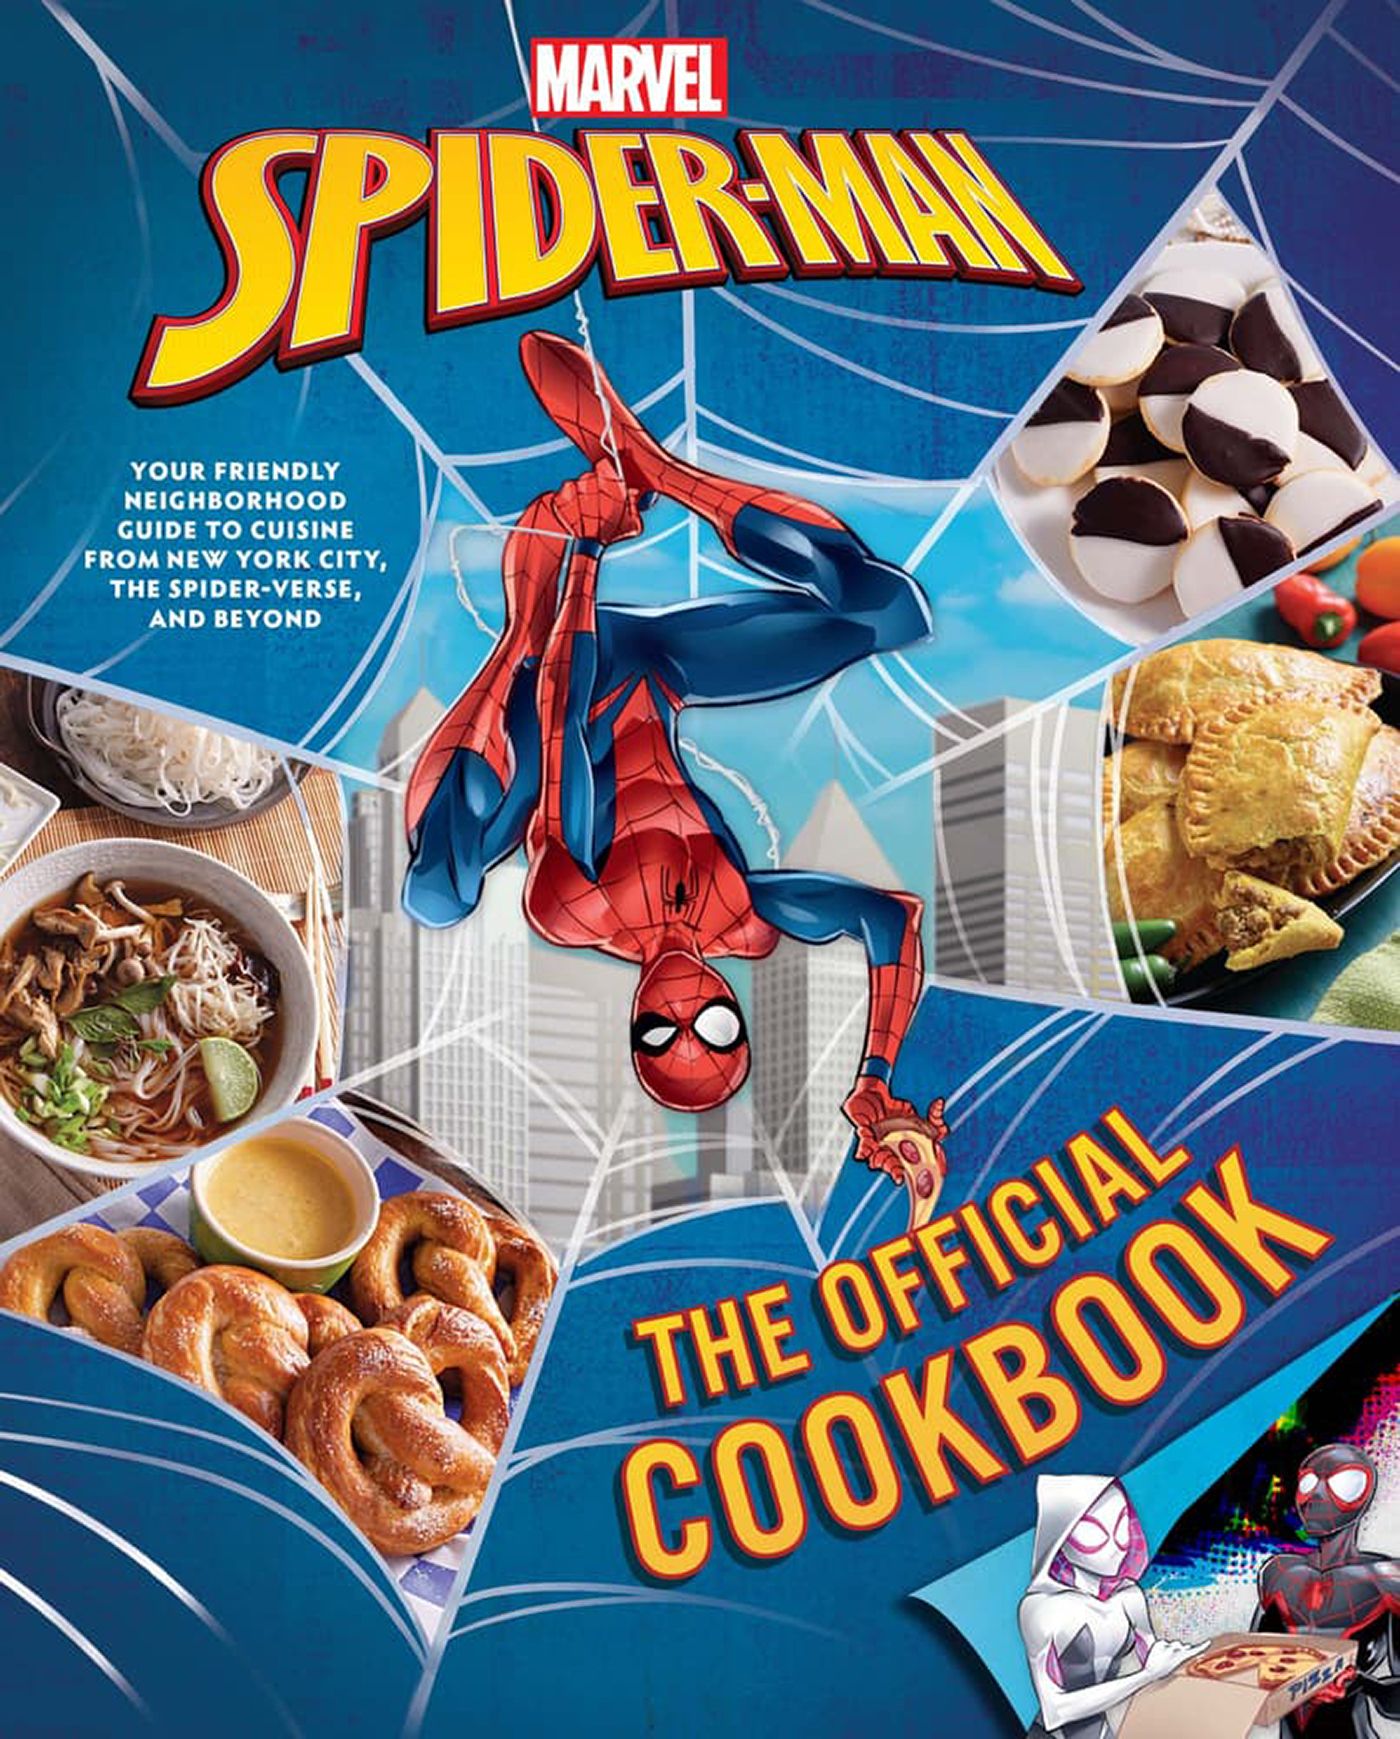 Marvel: Spider-Man: The Official Cookbook cover, featuring Spider-Man holding a slice of pizza while hanging upside down, surrounded by delicious food.